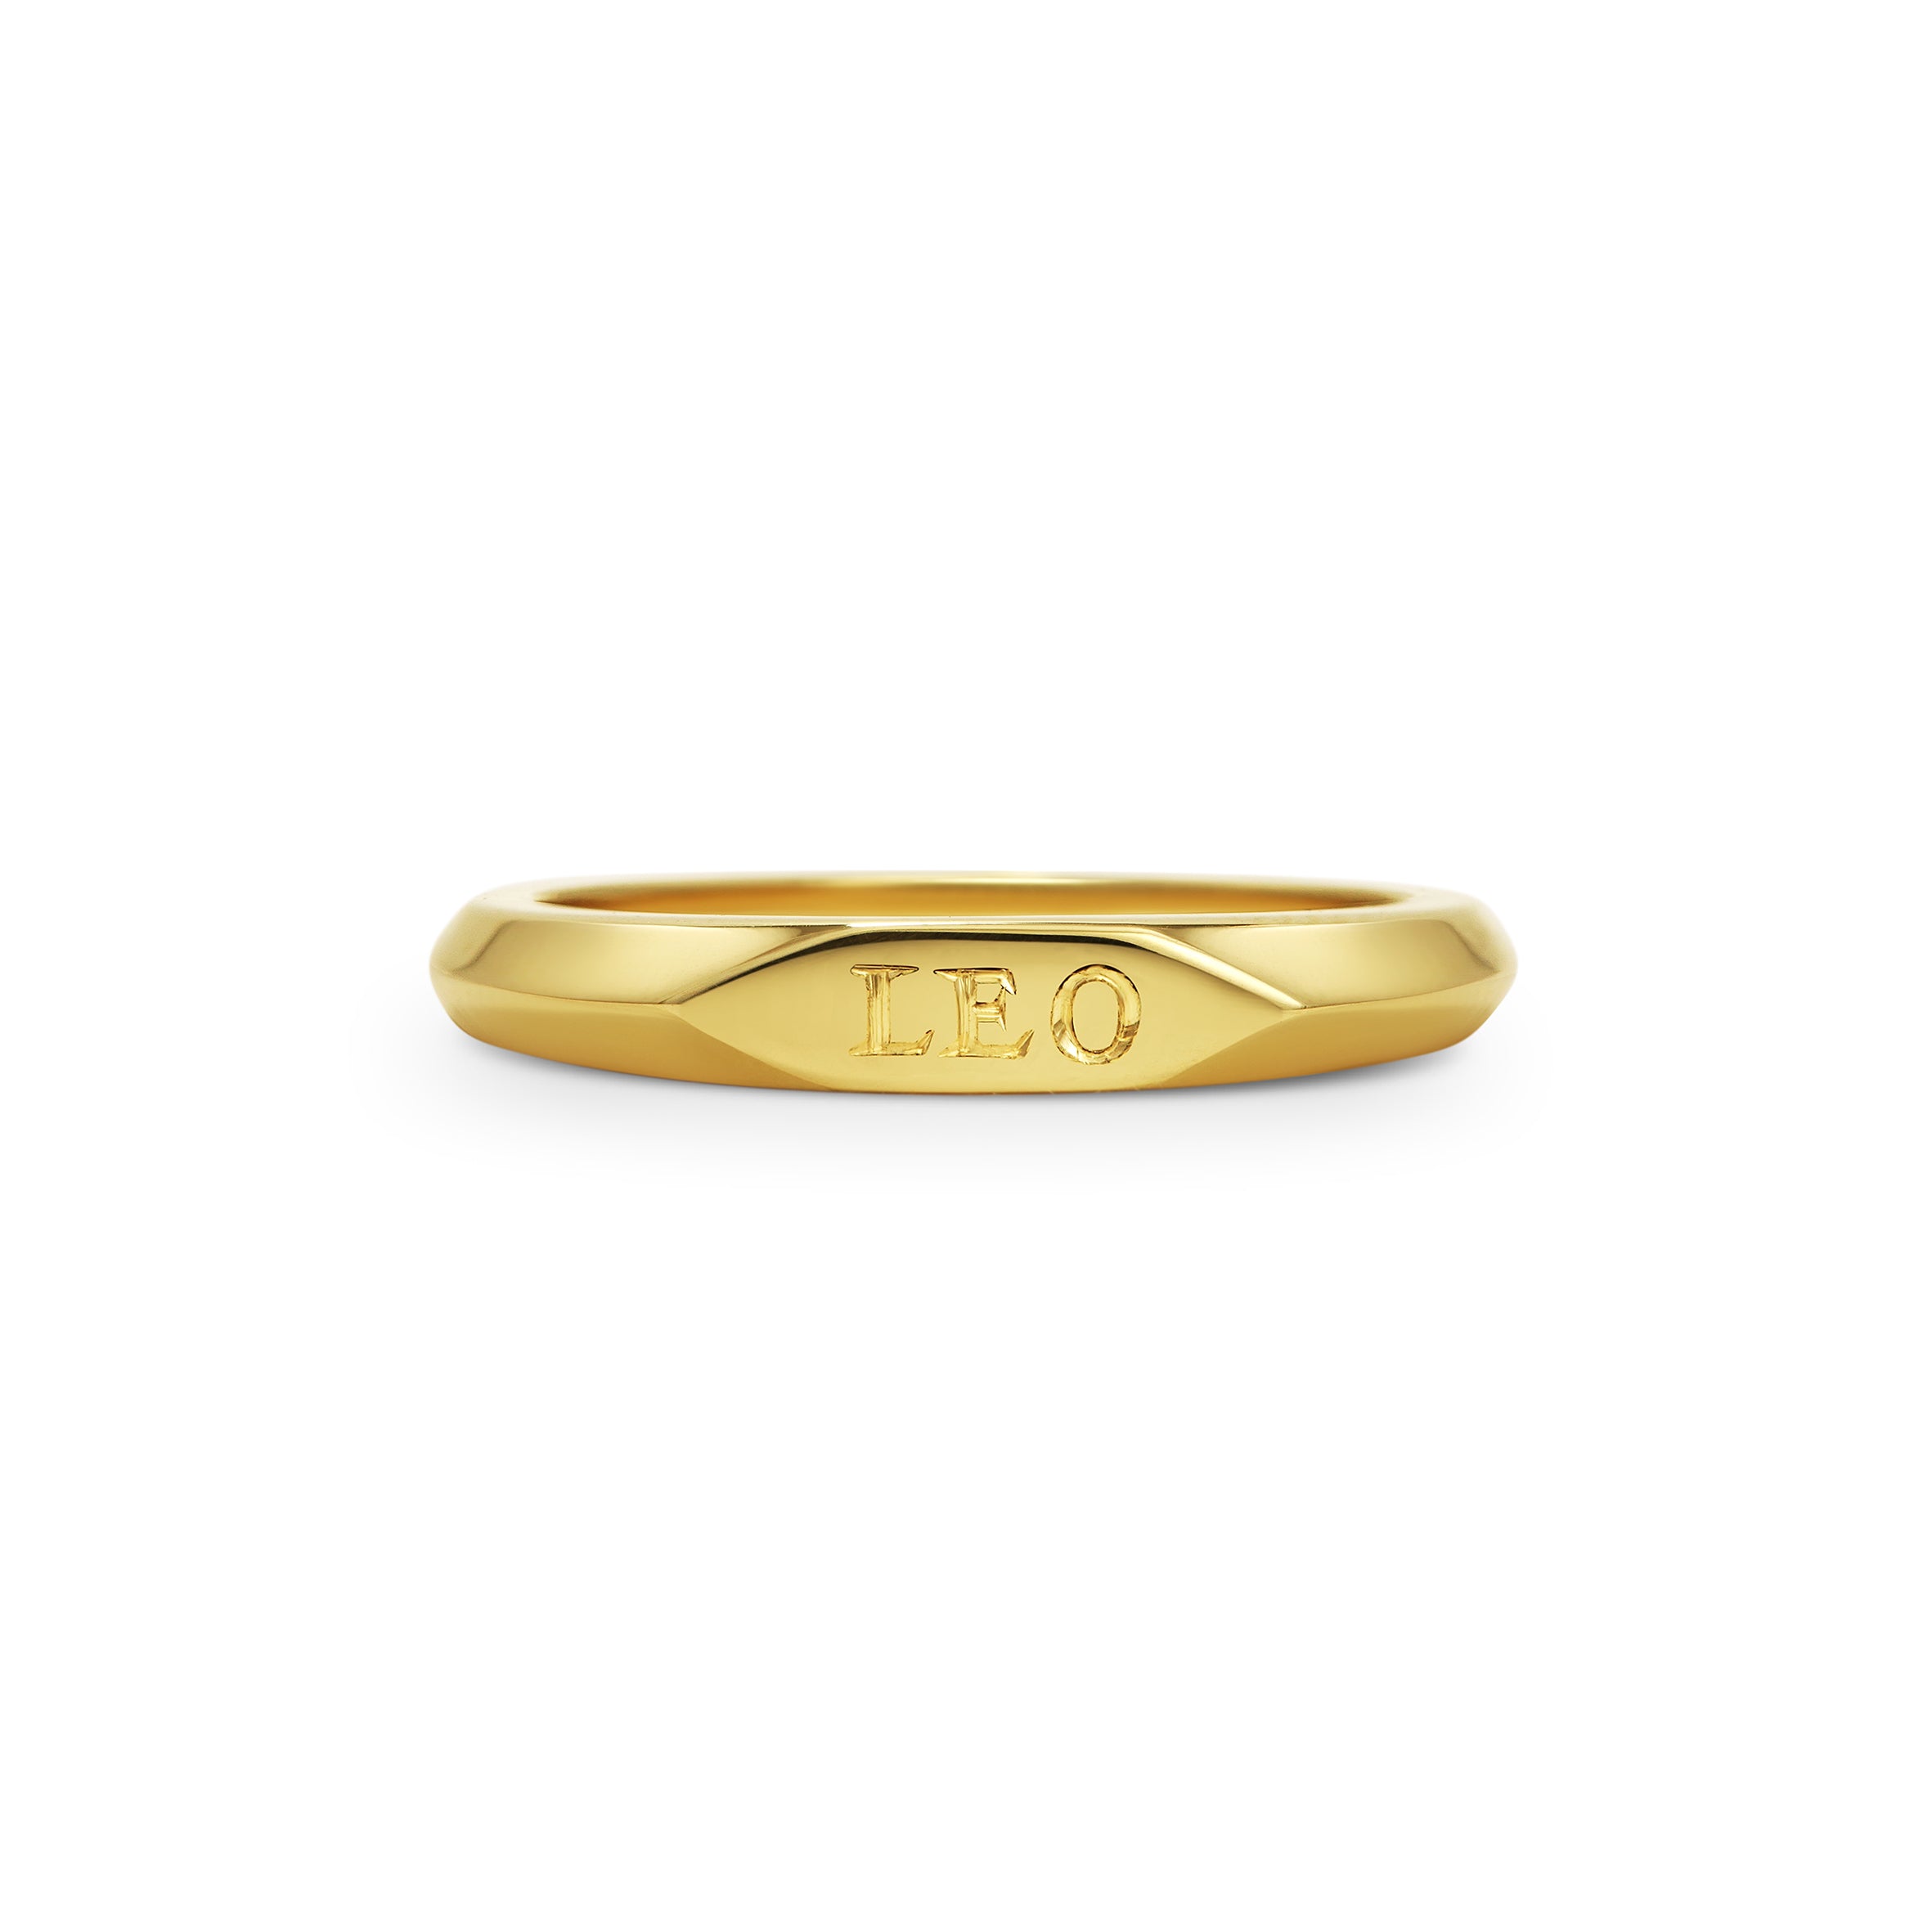 The Slim Signet Tapered Ring by East London jeweller Rachel Boston | Discover our collections of unique and timeless engagement rings, wedding rings, and modern fine jewellery.